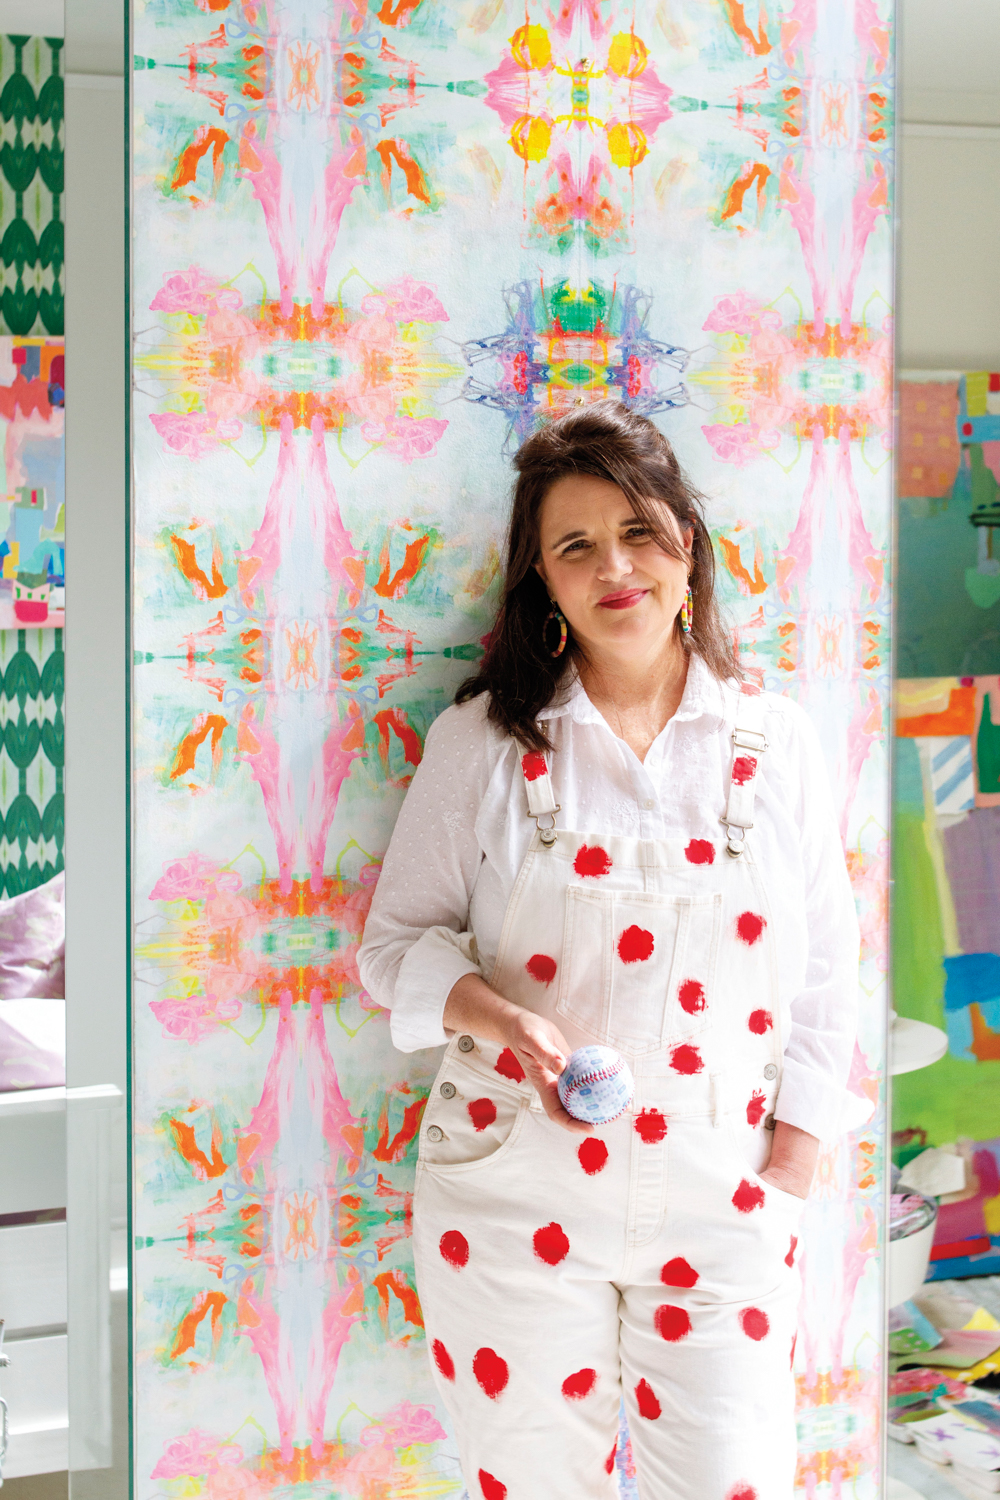 Headshot of artist Cathy Lancaster wearing white apron with red polka dots in front of pink and green artwork.